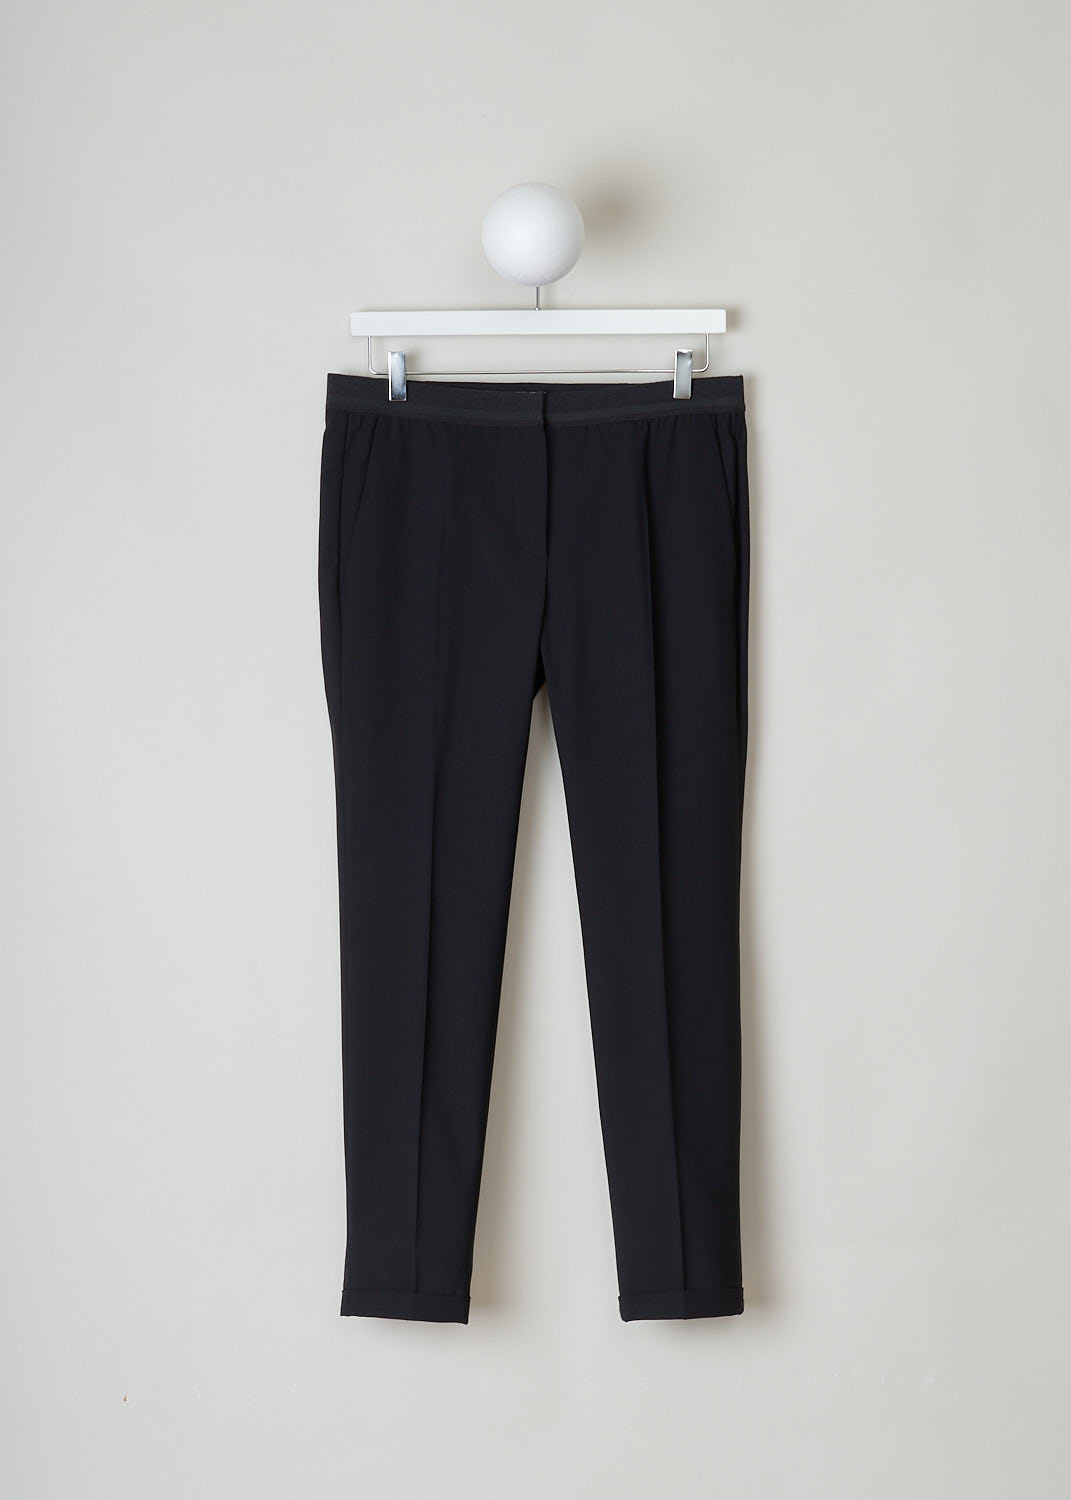 BRUNELLO CUCINELLI, BLACK PANTS WITH PARTLY ELASTICATED WAISTBAND, M0W07P1500_CD531, Black, Front, These black pants have a partly elasticated ribbed waistline with with a decorative horizontal stripe. These pants have two belt loops on the backside. A concealed clasp and zipper function as the closing option. The pants have forward slanted pockets in the front and two buttoned welt pockets in the back.The tapered pant legs have centre creases. These pants have a folded hem.
